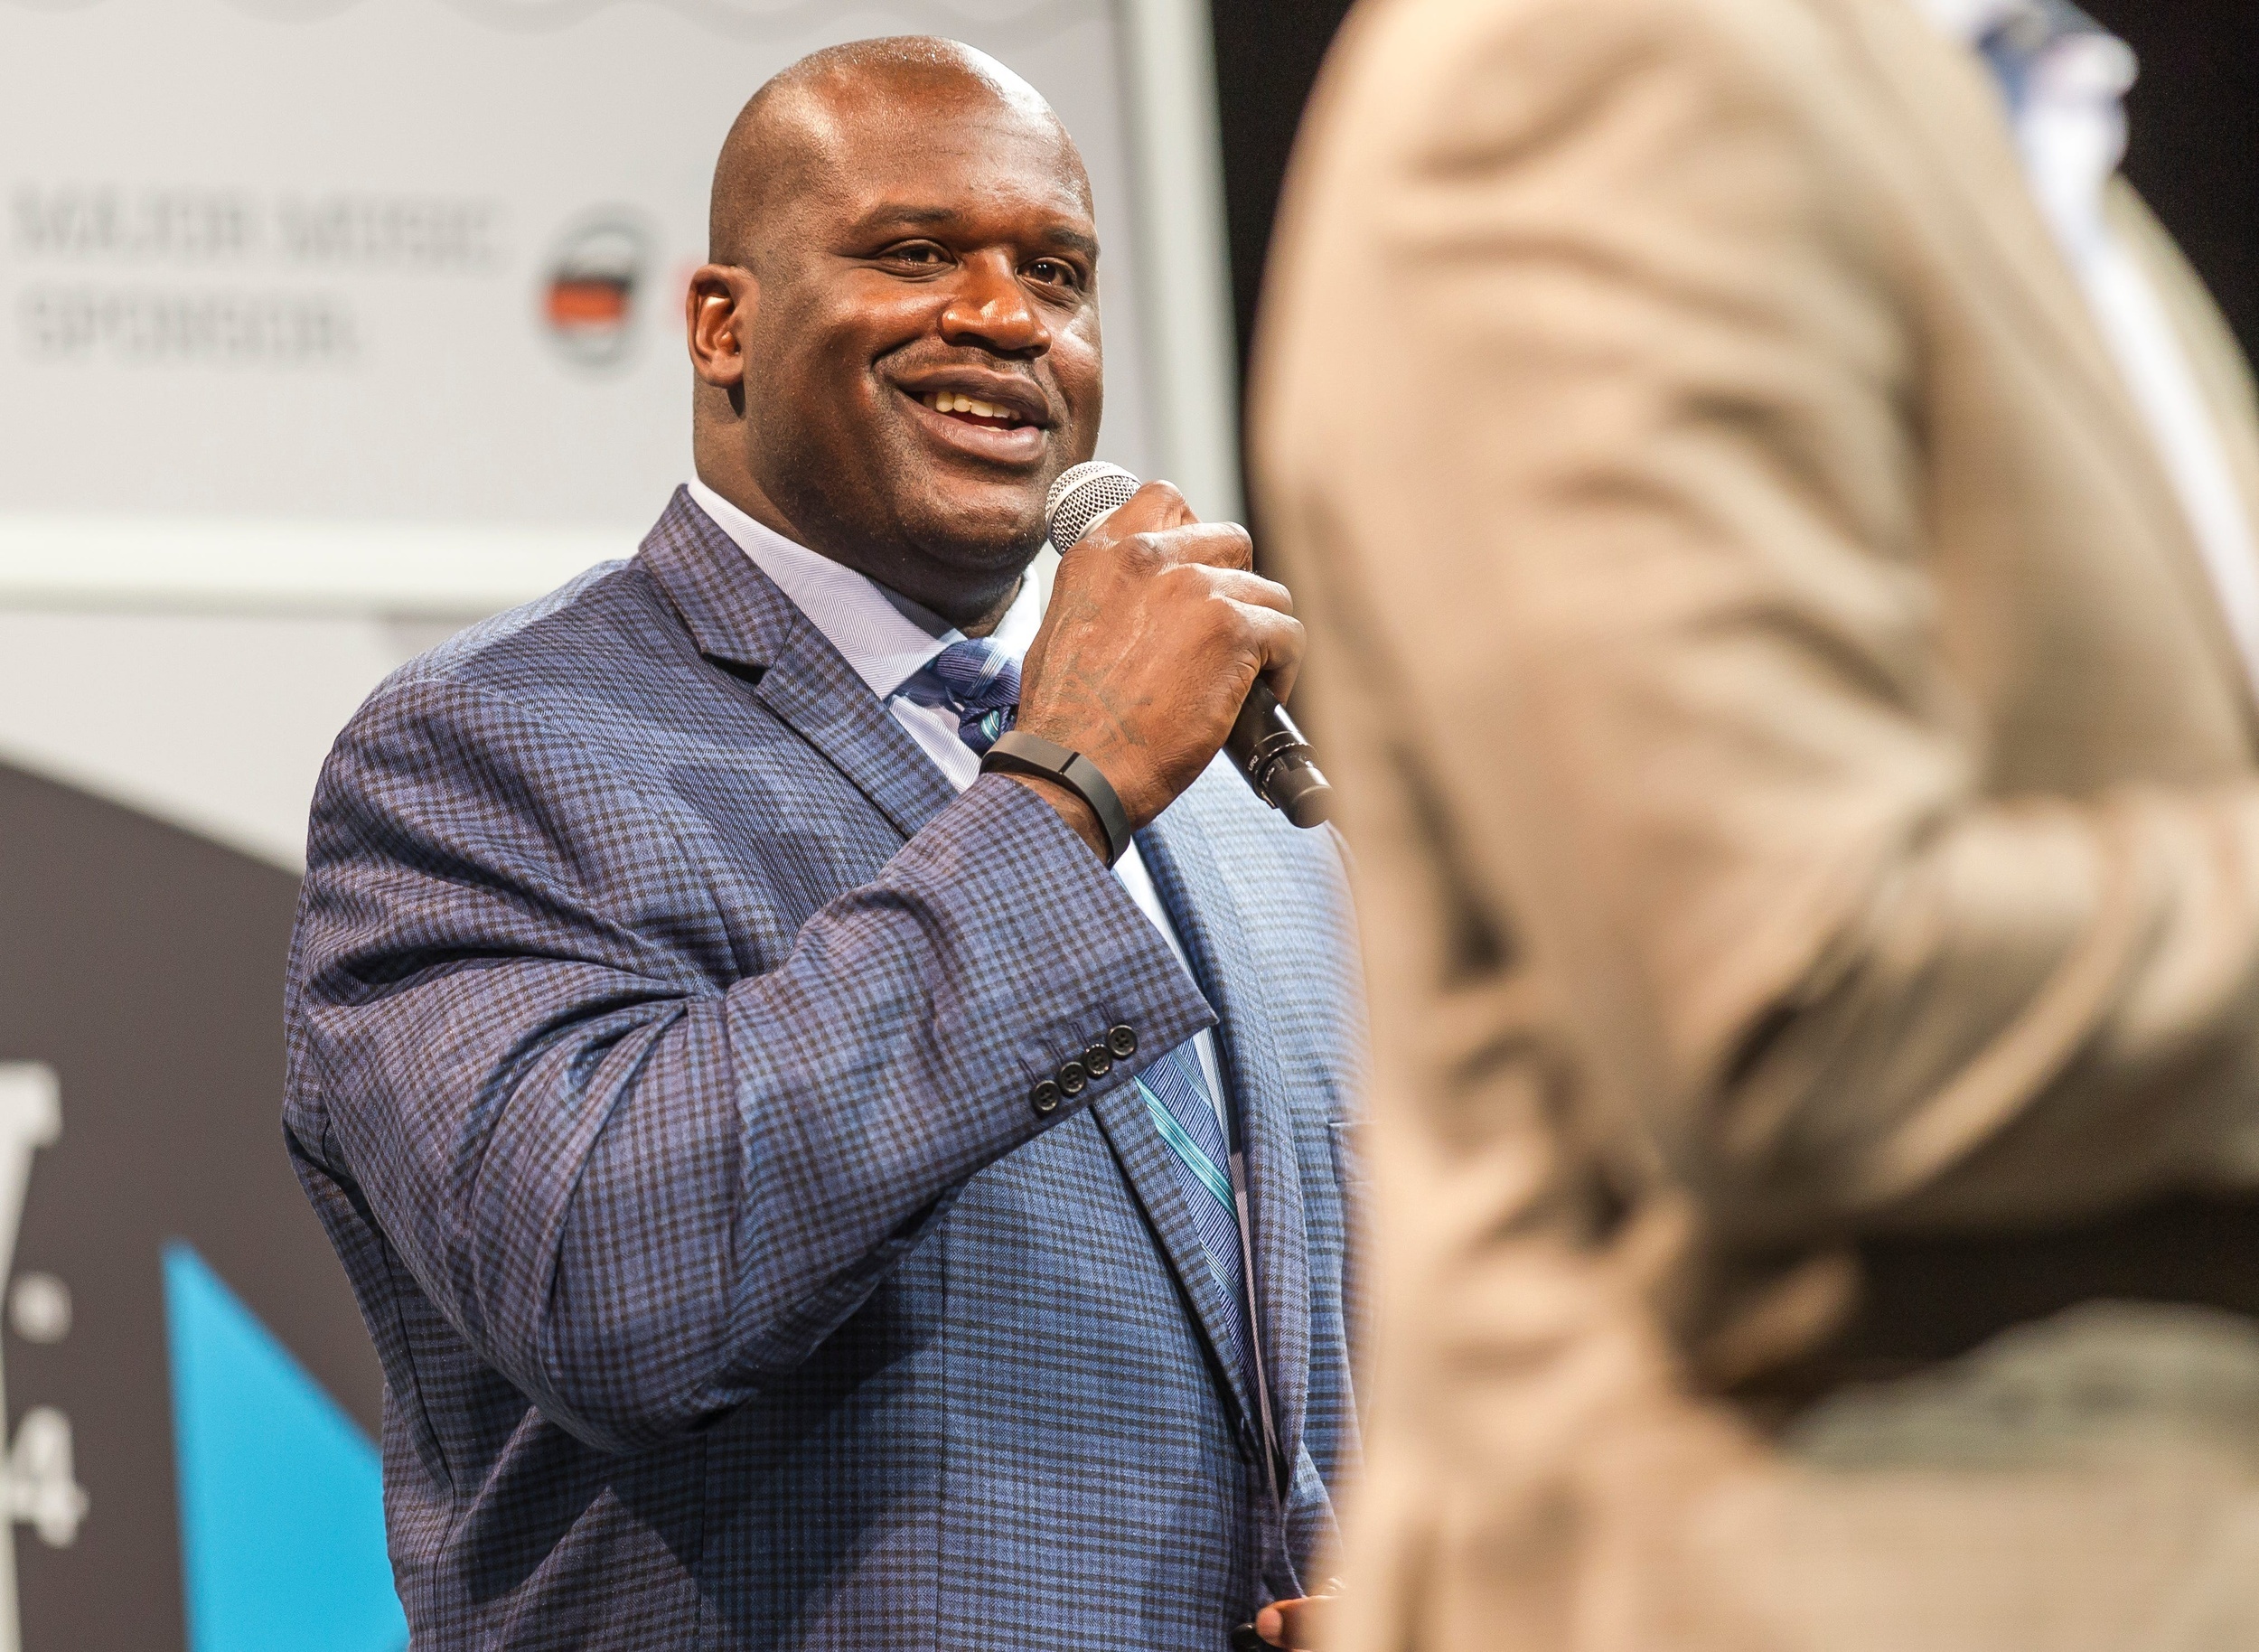 shaquille o'neal fires back at kendrick perkins after recent criticism